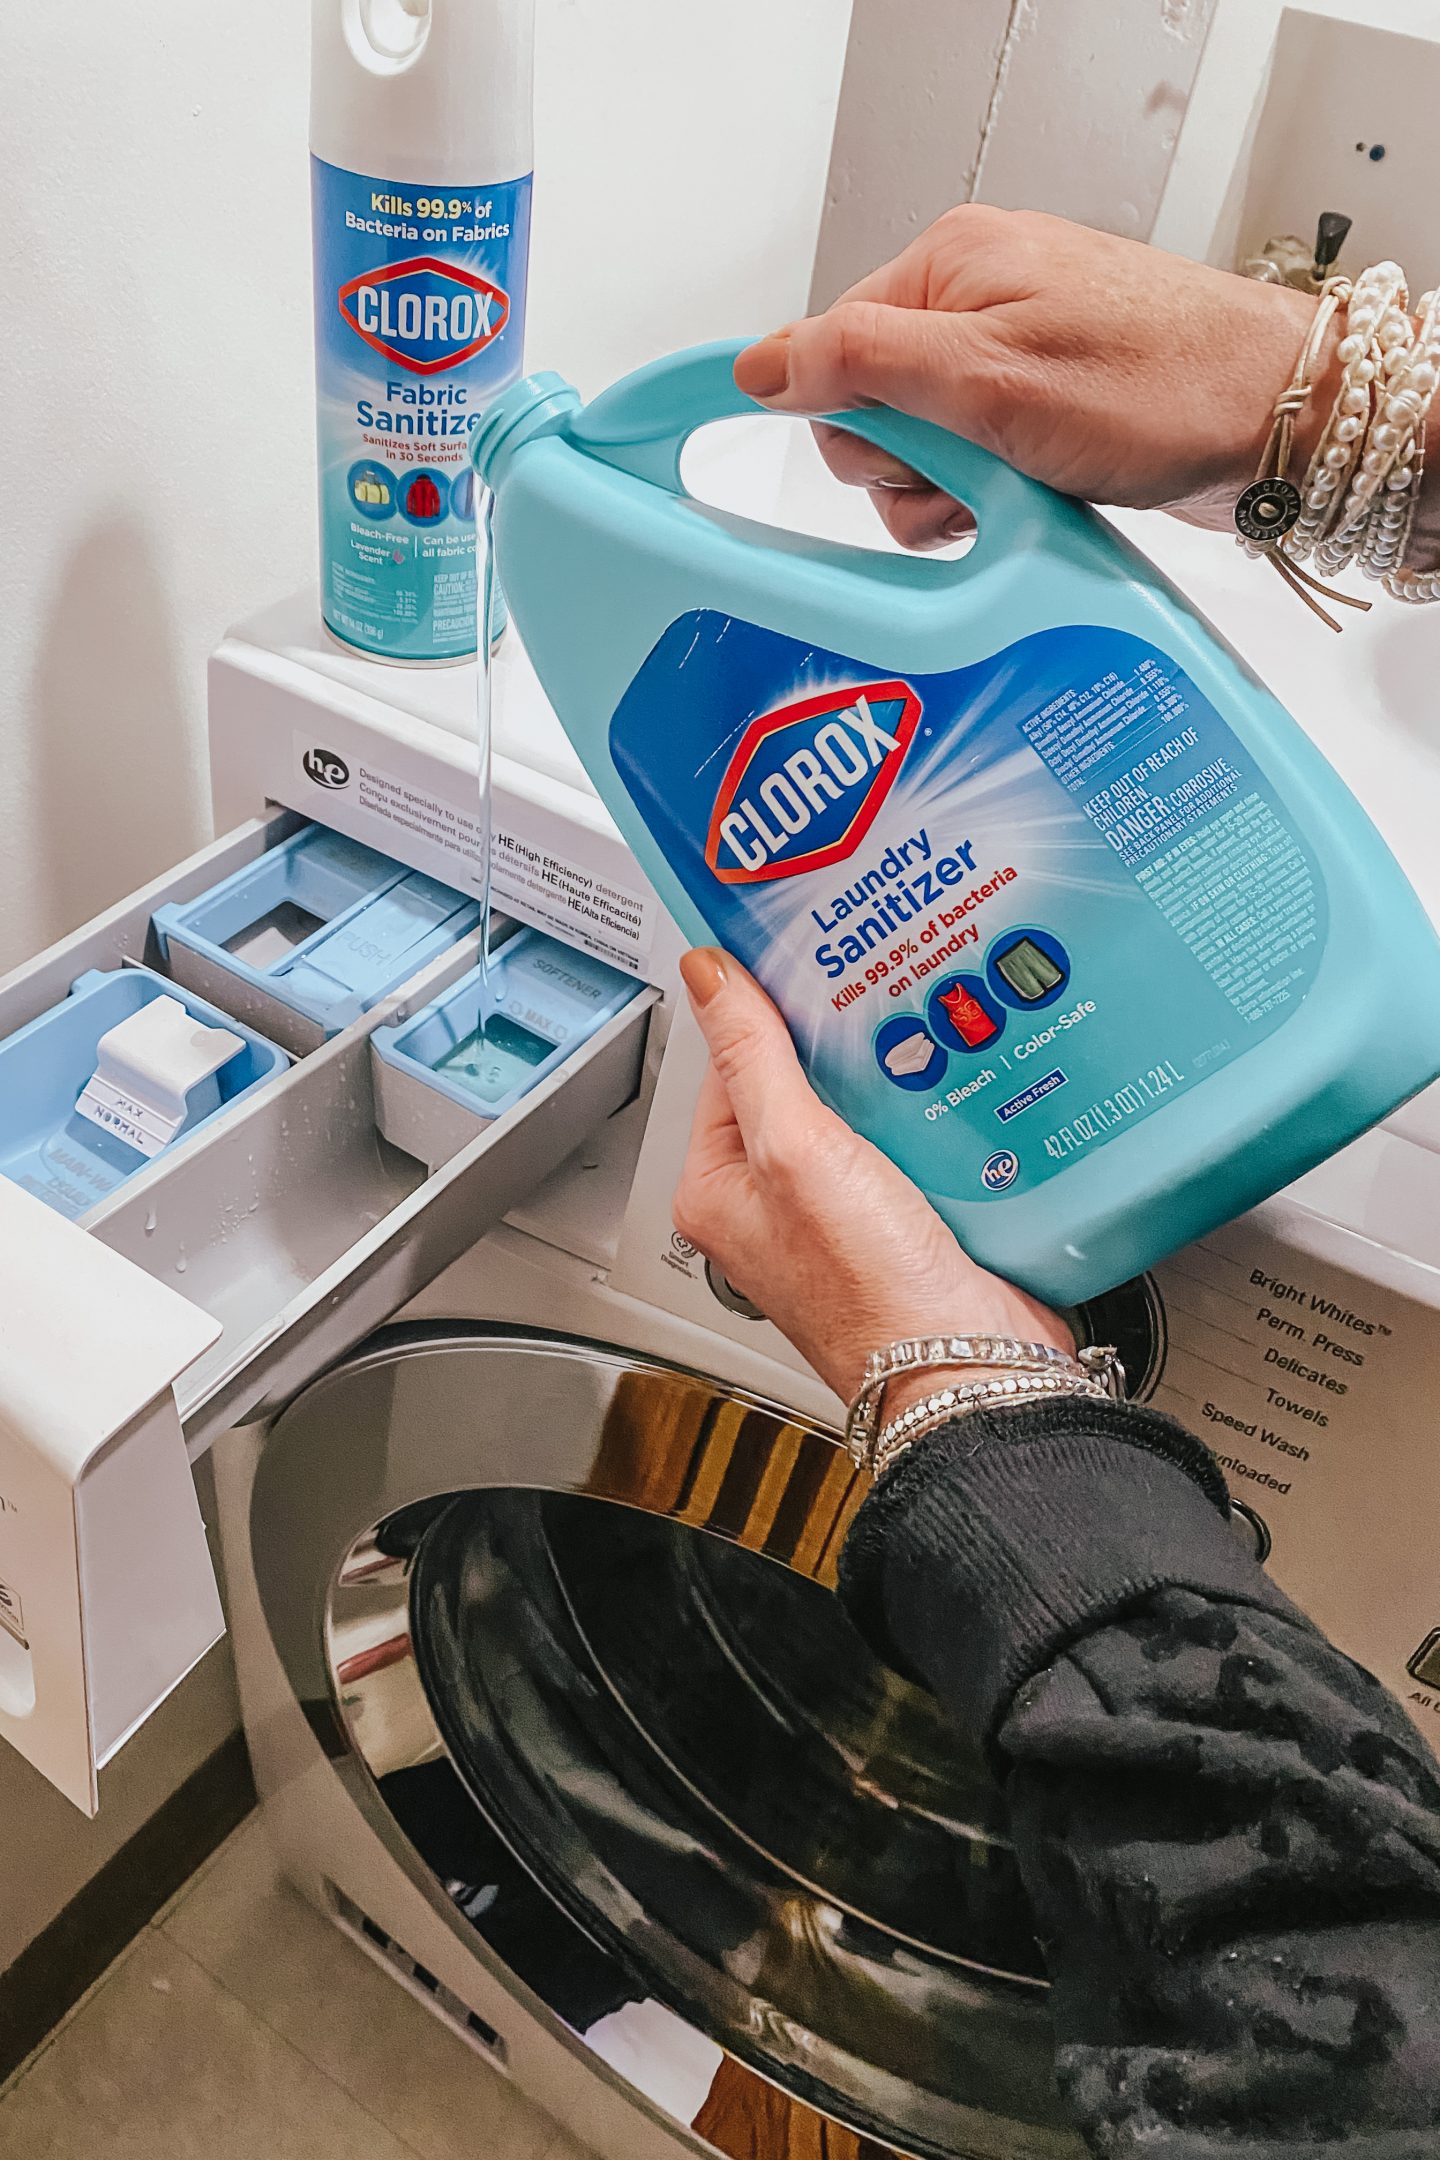 How Do You Use Clorox Laundry Sanitizer?